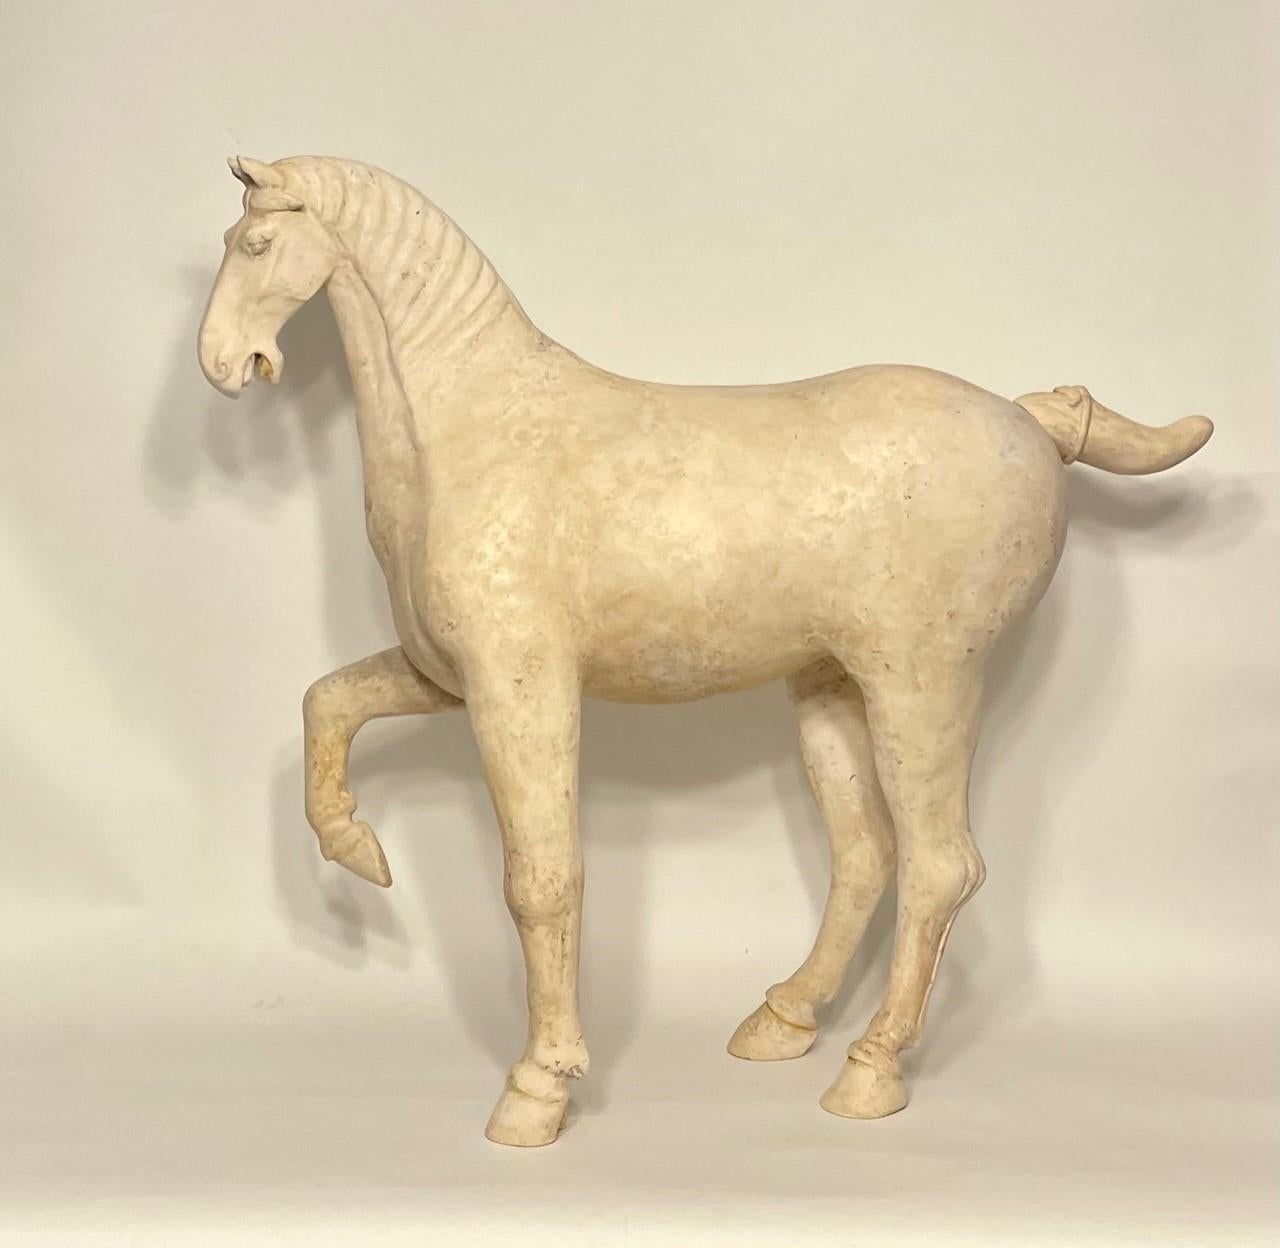 This spirited Tang Dynasty (618–907 AD) prancing horse is handsomely model with one foreleg raised, it’s mane swept to one side, expressive pricked ears, flared nostrils and open mouth bearing its teeth. The tail is docked tail and is neatly tied.